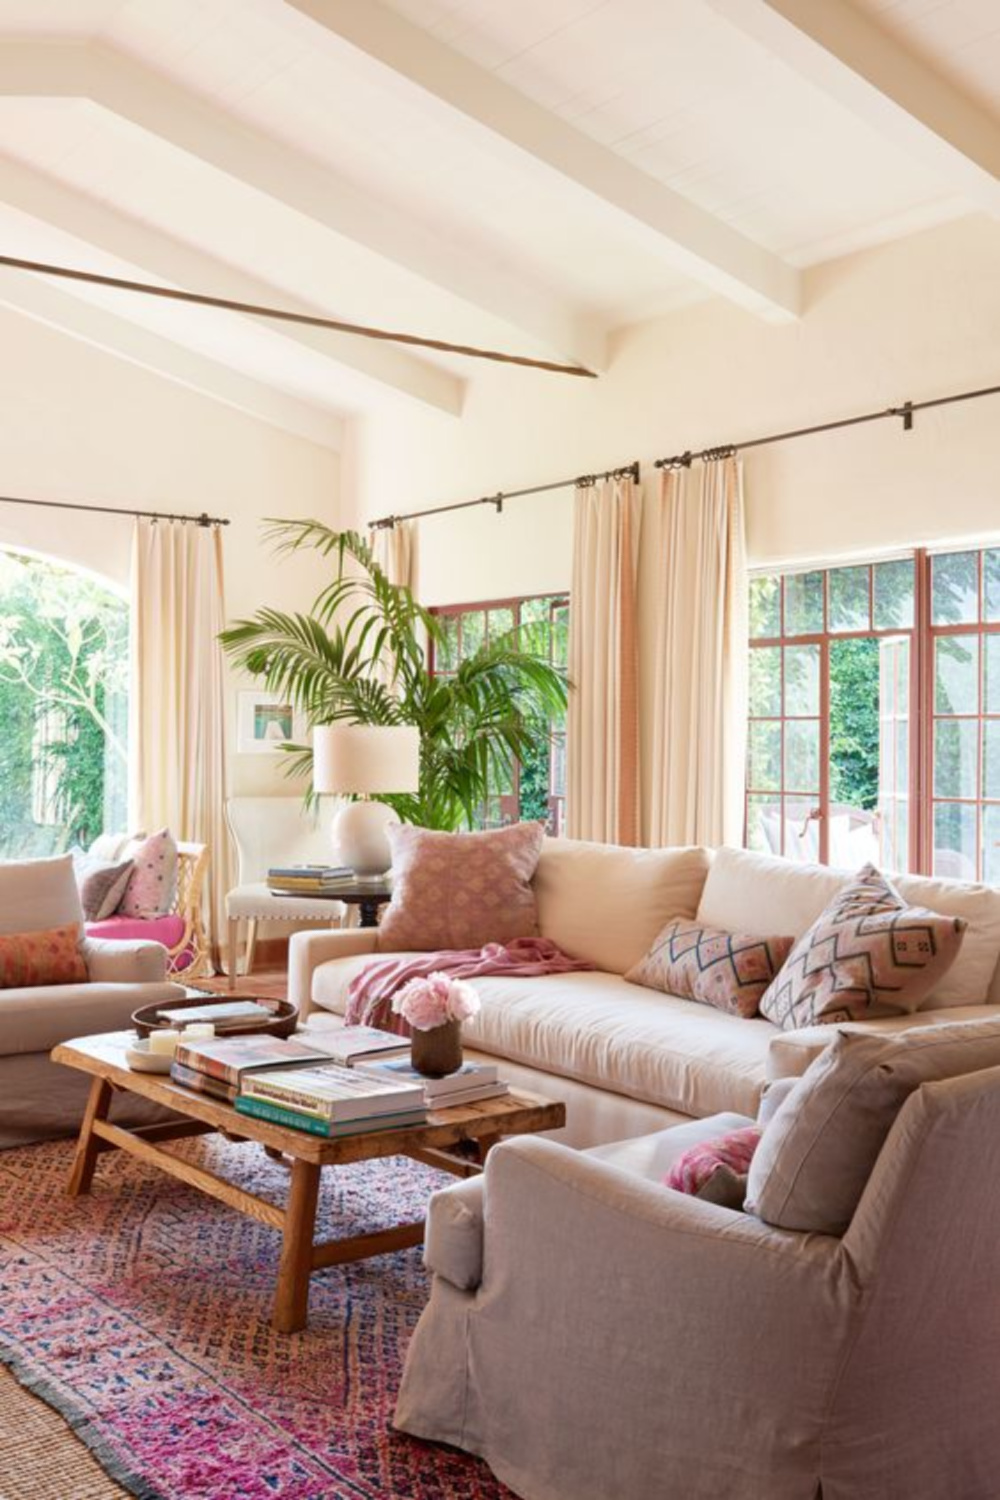 https://www.hellolovelystudio.com/wp-content/uploads/2020/08/home-again-house-movie-reese-witherspoon-pink-living-room.jpg